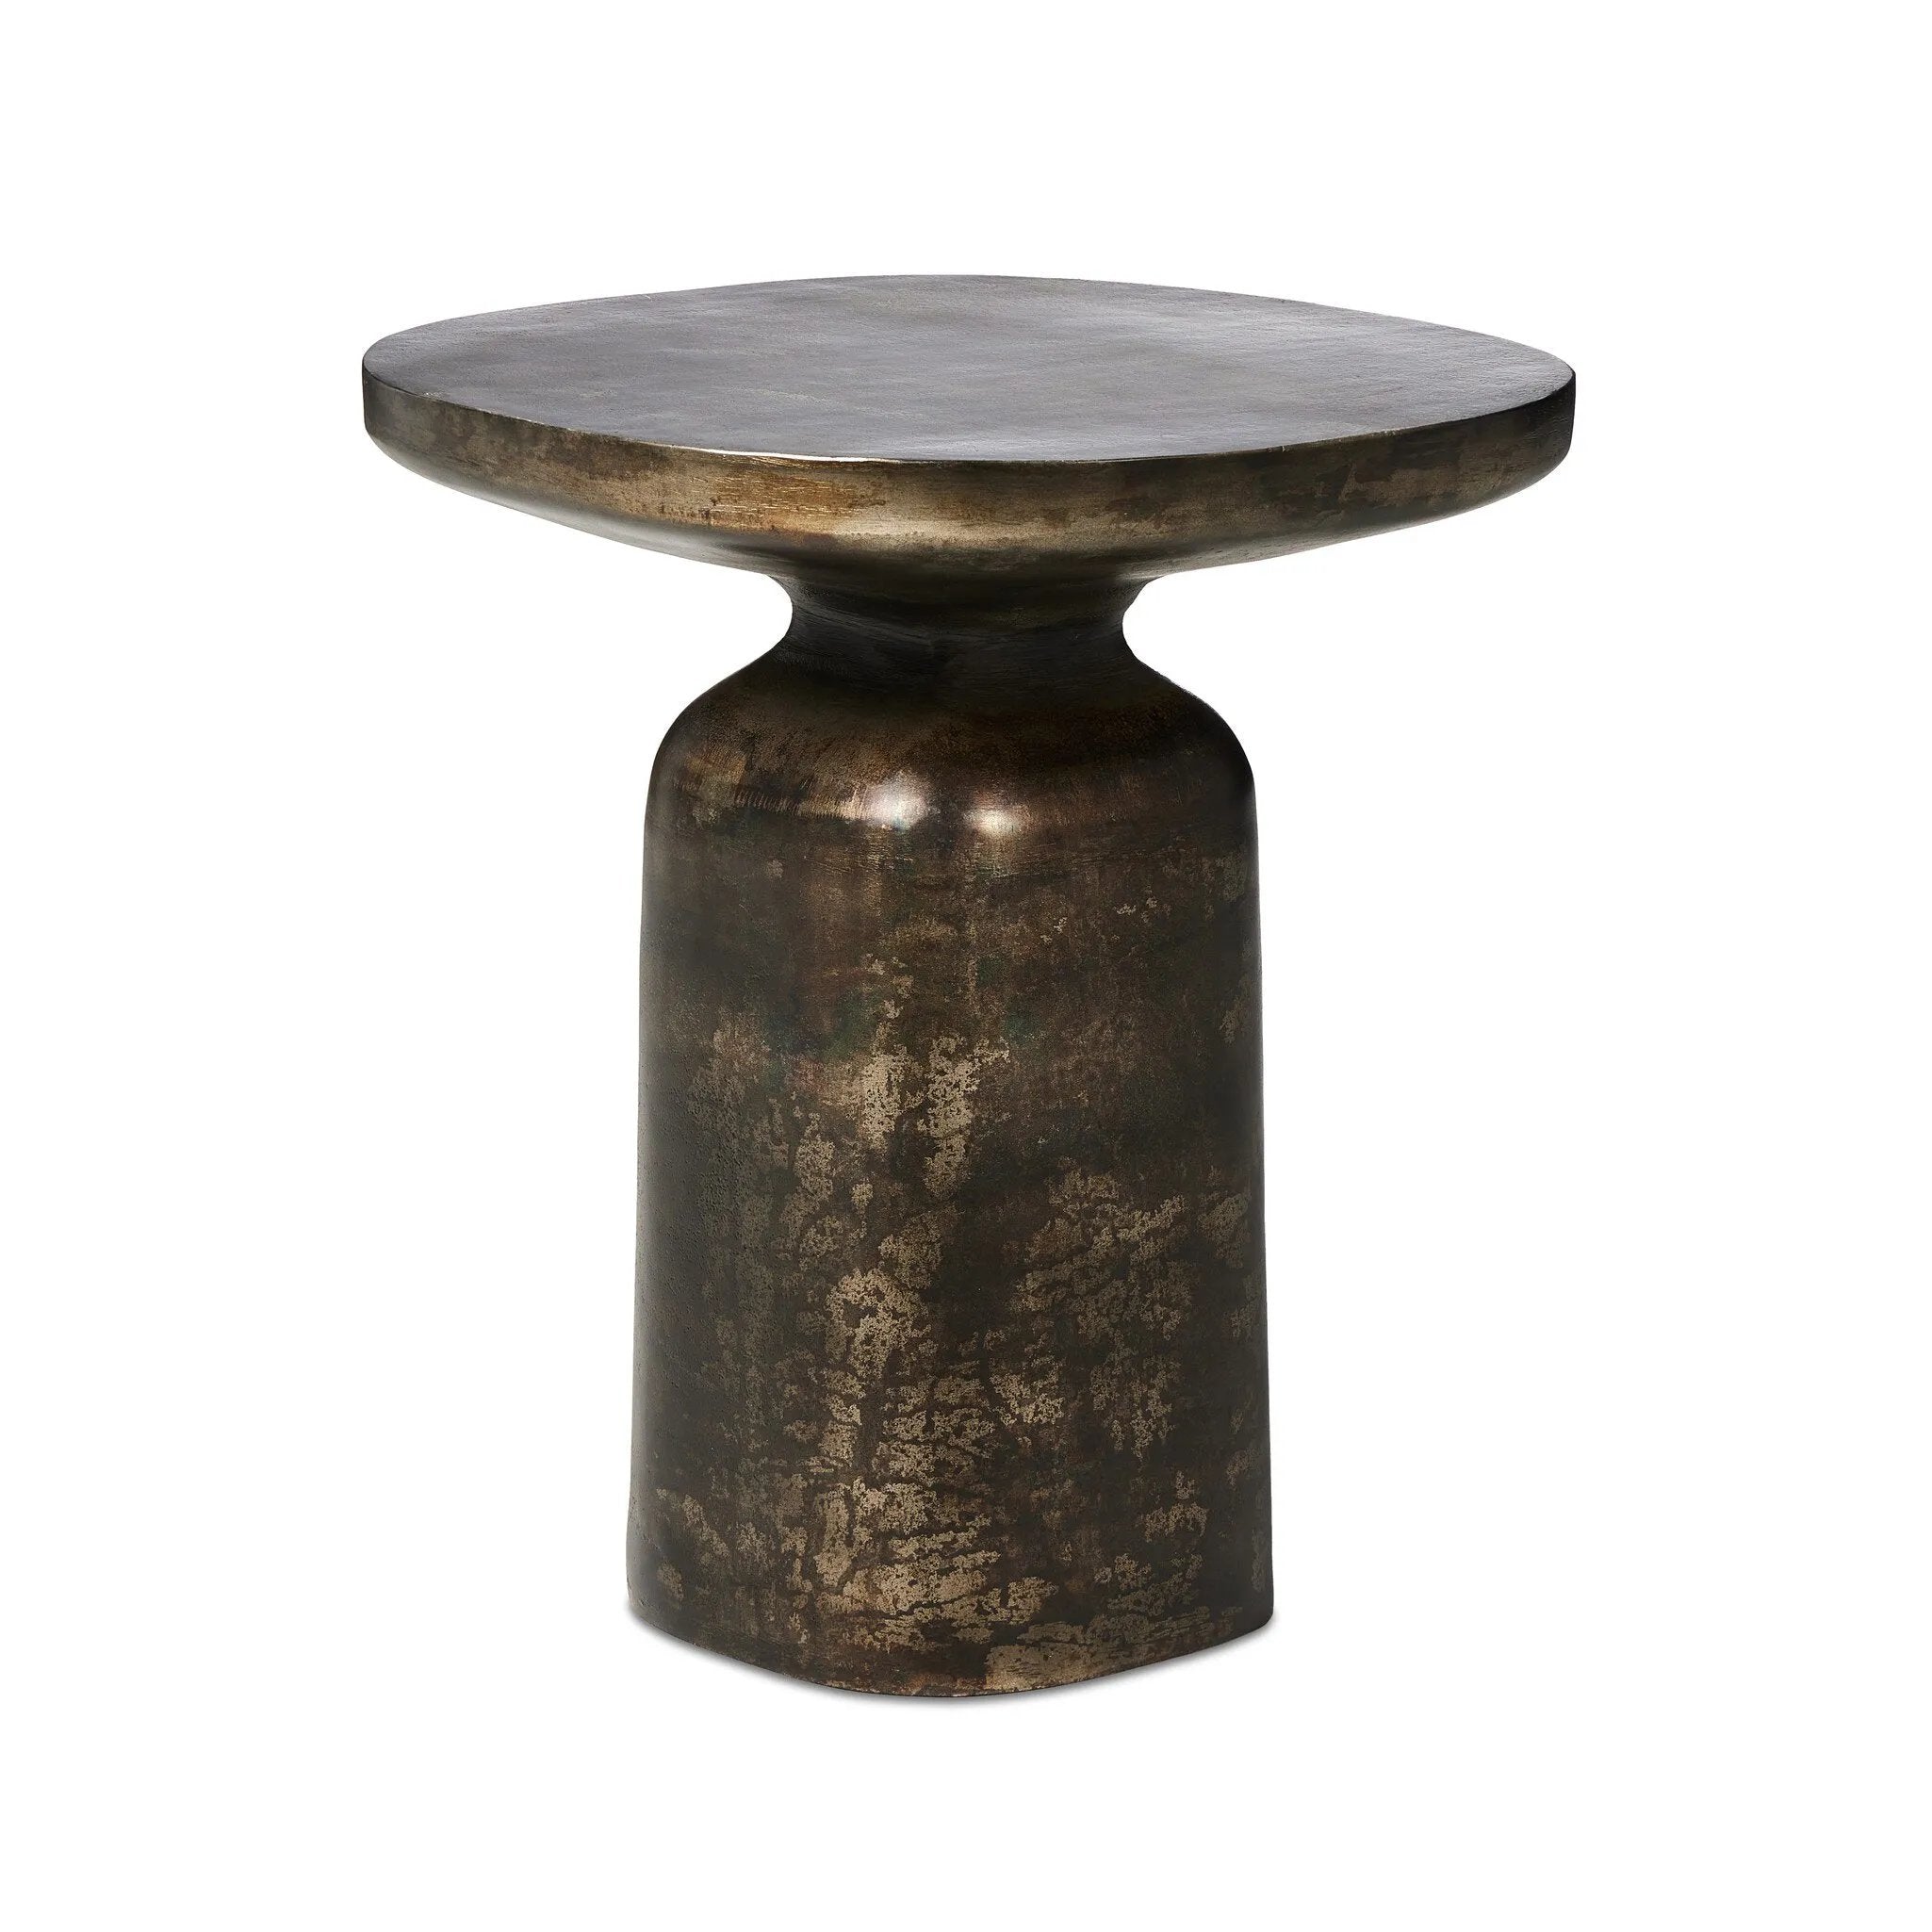 Forged from cast iron with a distressed bronze patina finish. A sturdy pedestal base and rounded square top create a functional, industrial-inspired piece.Collection: Marlo Amethyst Home provides interior design, new home construction design consulting, vintage area rugs, and lighting in the Park City metro area.